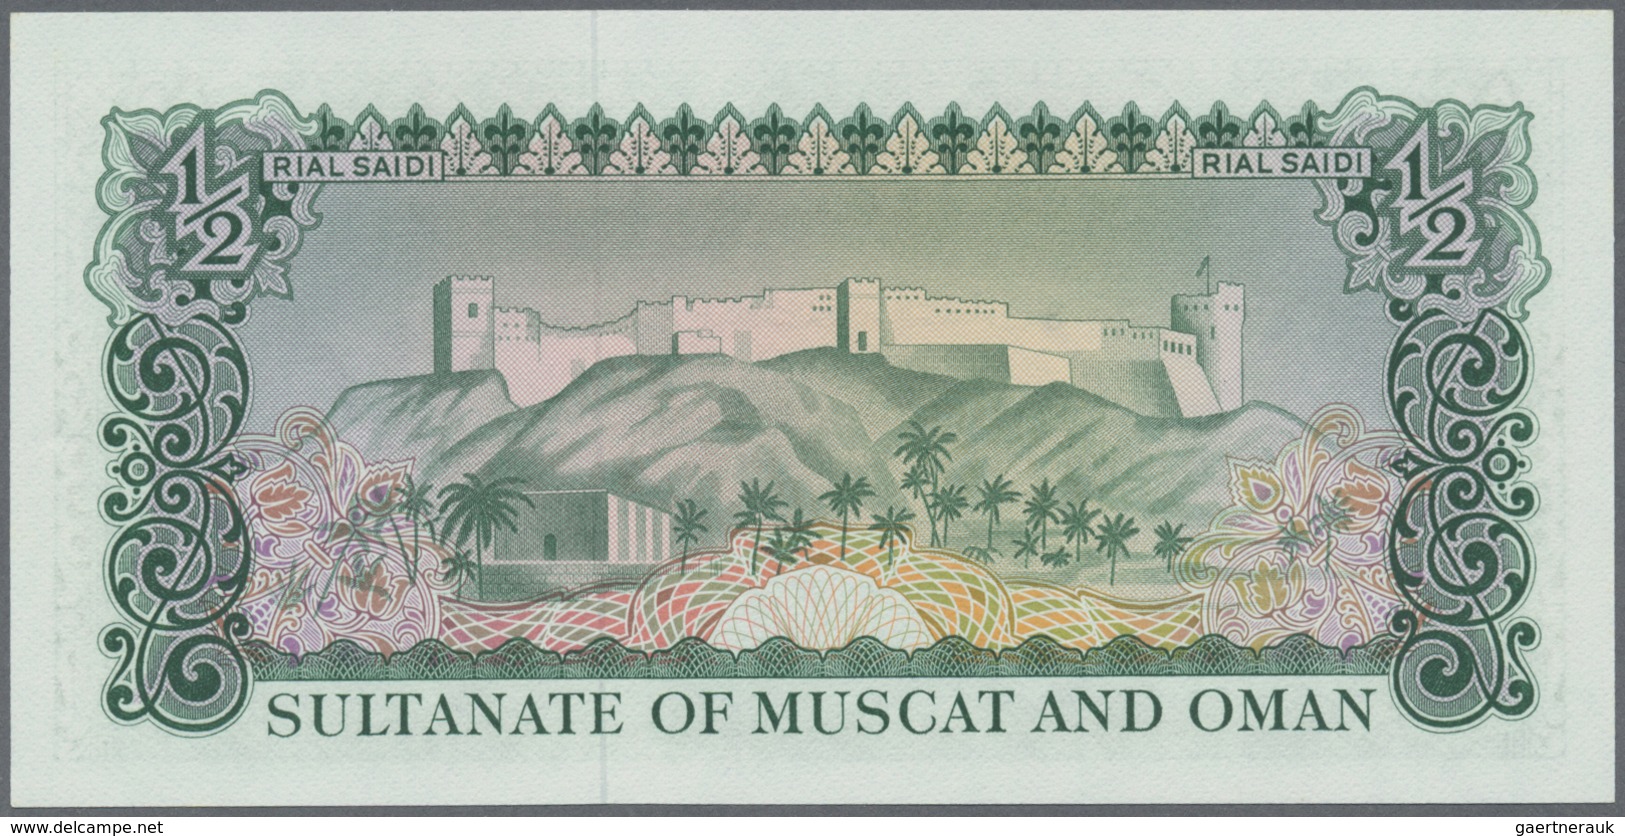 Oman: Sulatanate of Muscat and Oman, set with 6 Banknotes comprising 100 Baiza, 1/4, 1/2, 1, 5 and 1